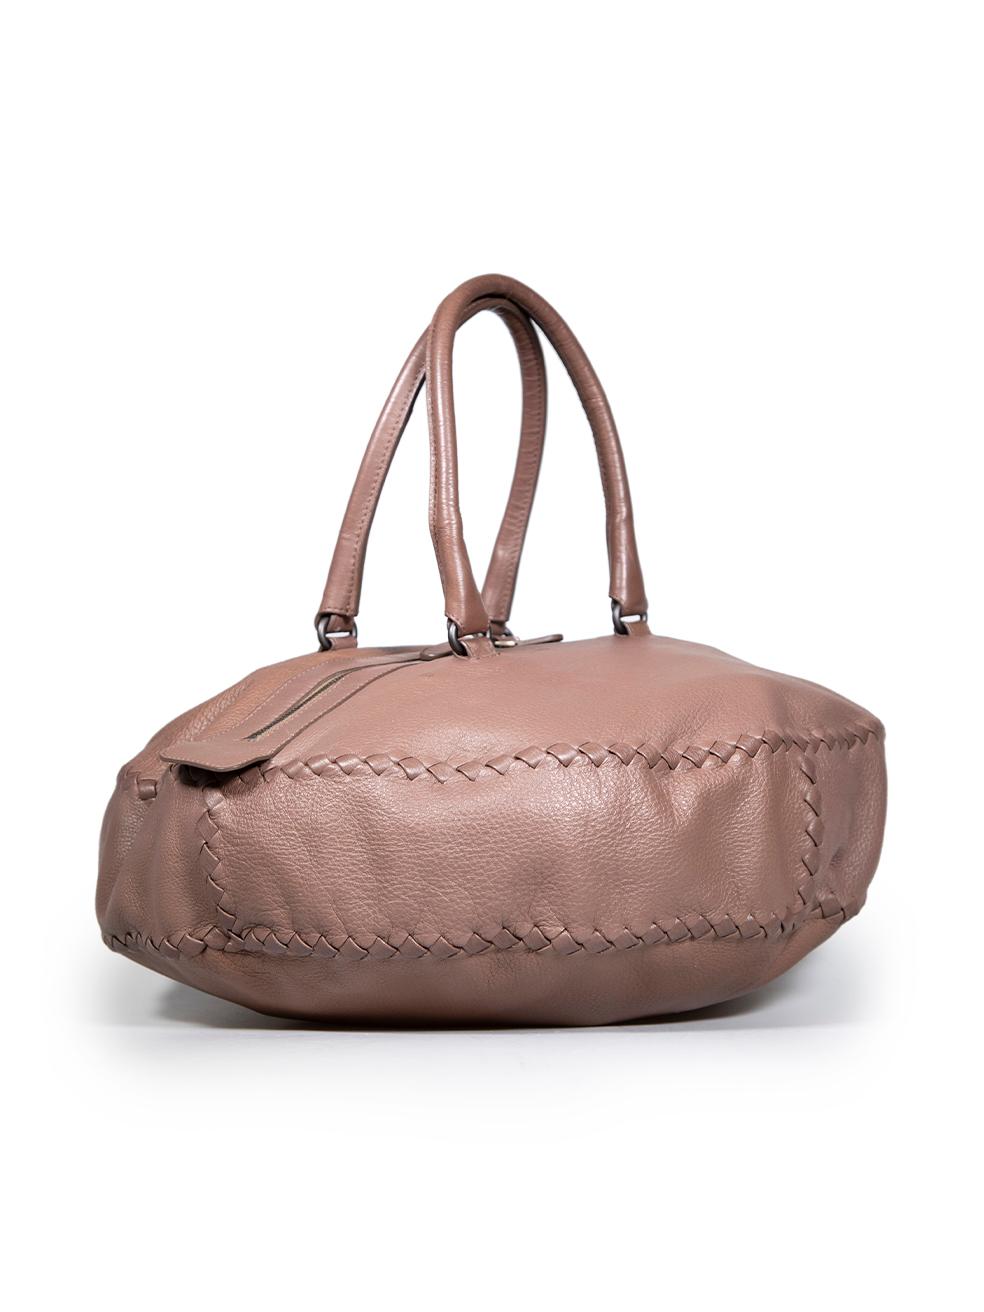 CONDITION is Very good. Minimal wear to bag is evident. Minimal creasing to the leather handle due to poor storage. There is one small small mark on the side of the zip facing on this used Bottega Veneta designer resale item.
 
 
 
 Details
 
 
